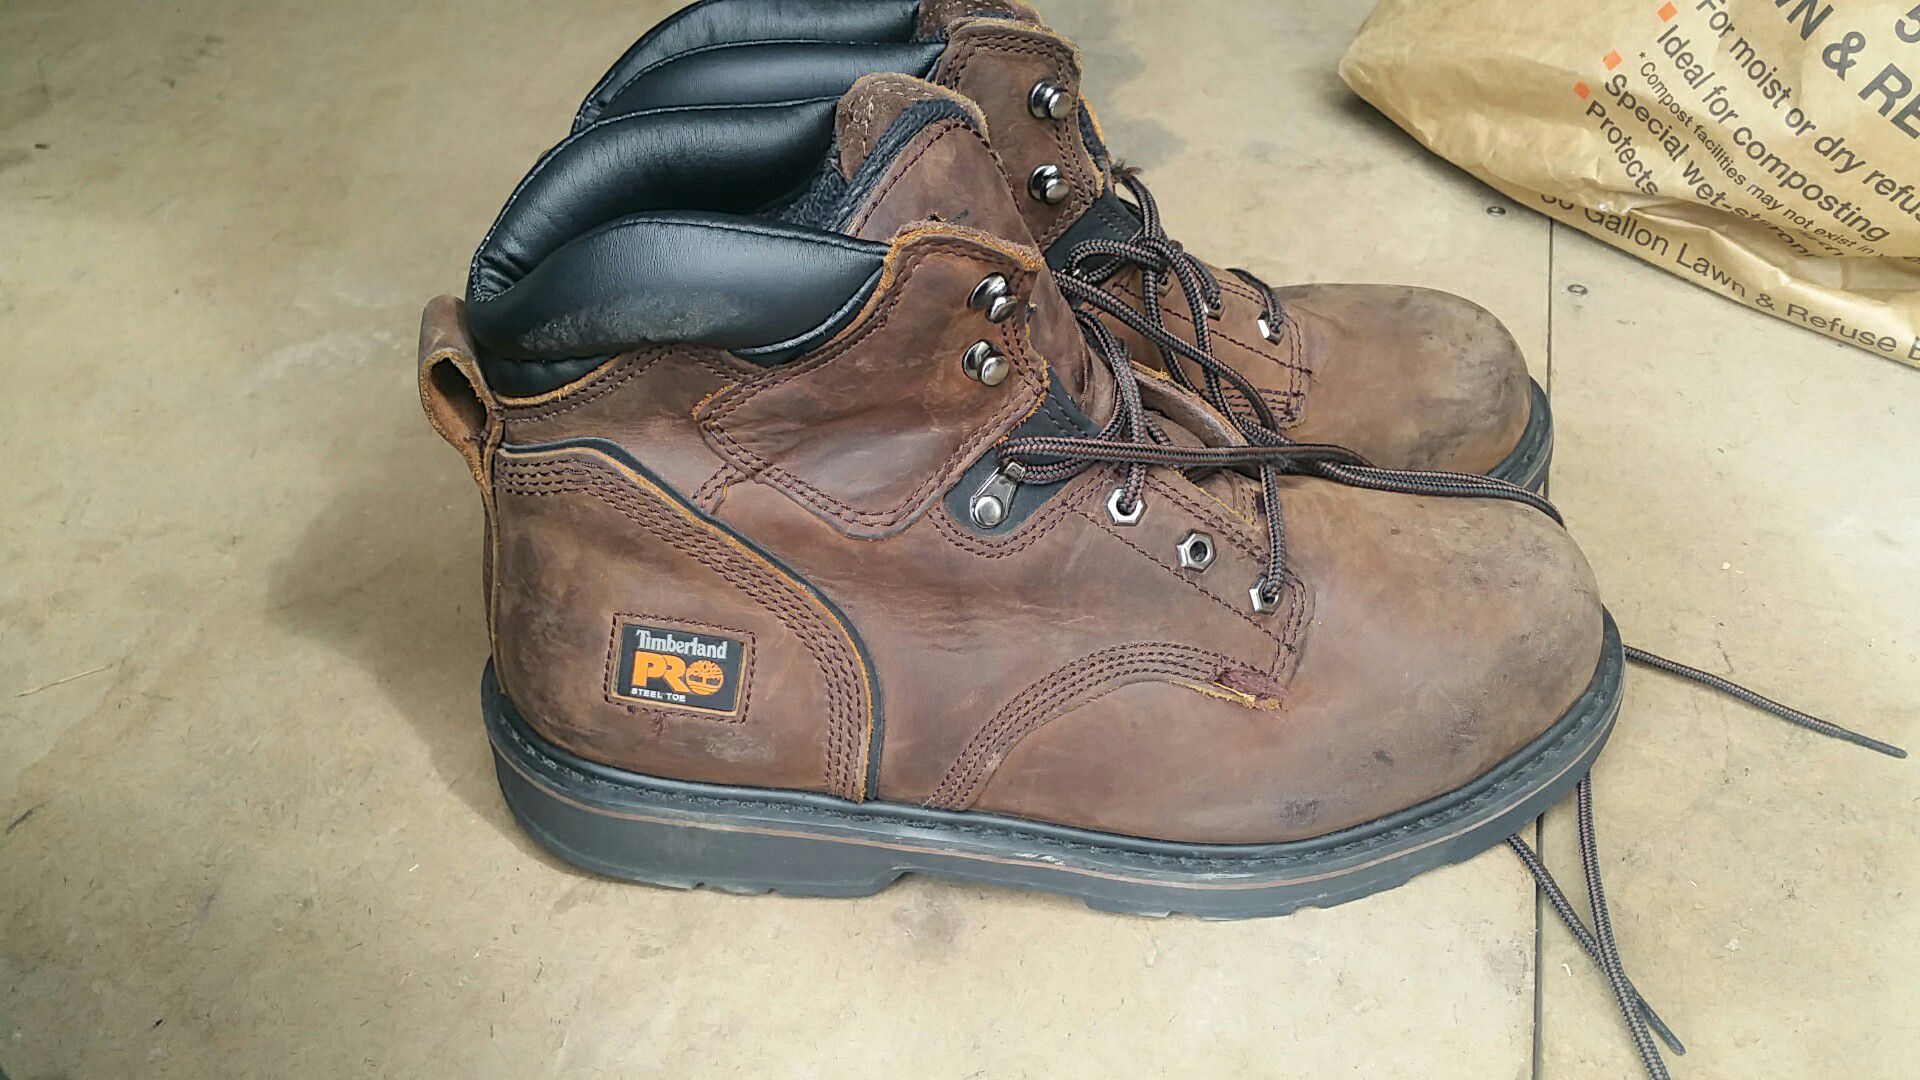 Timberland Pro steel toe work boot size 12